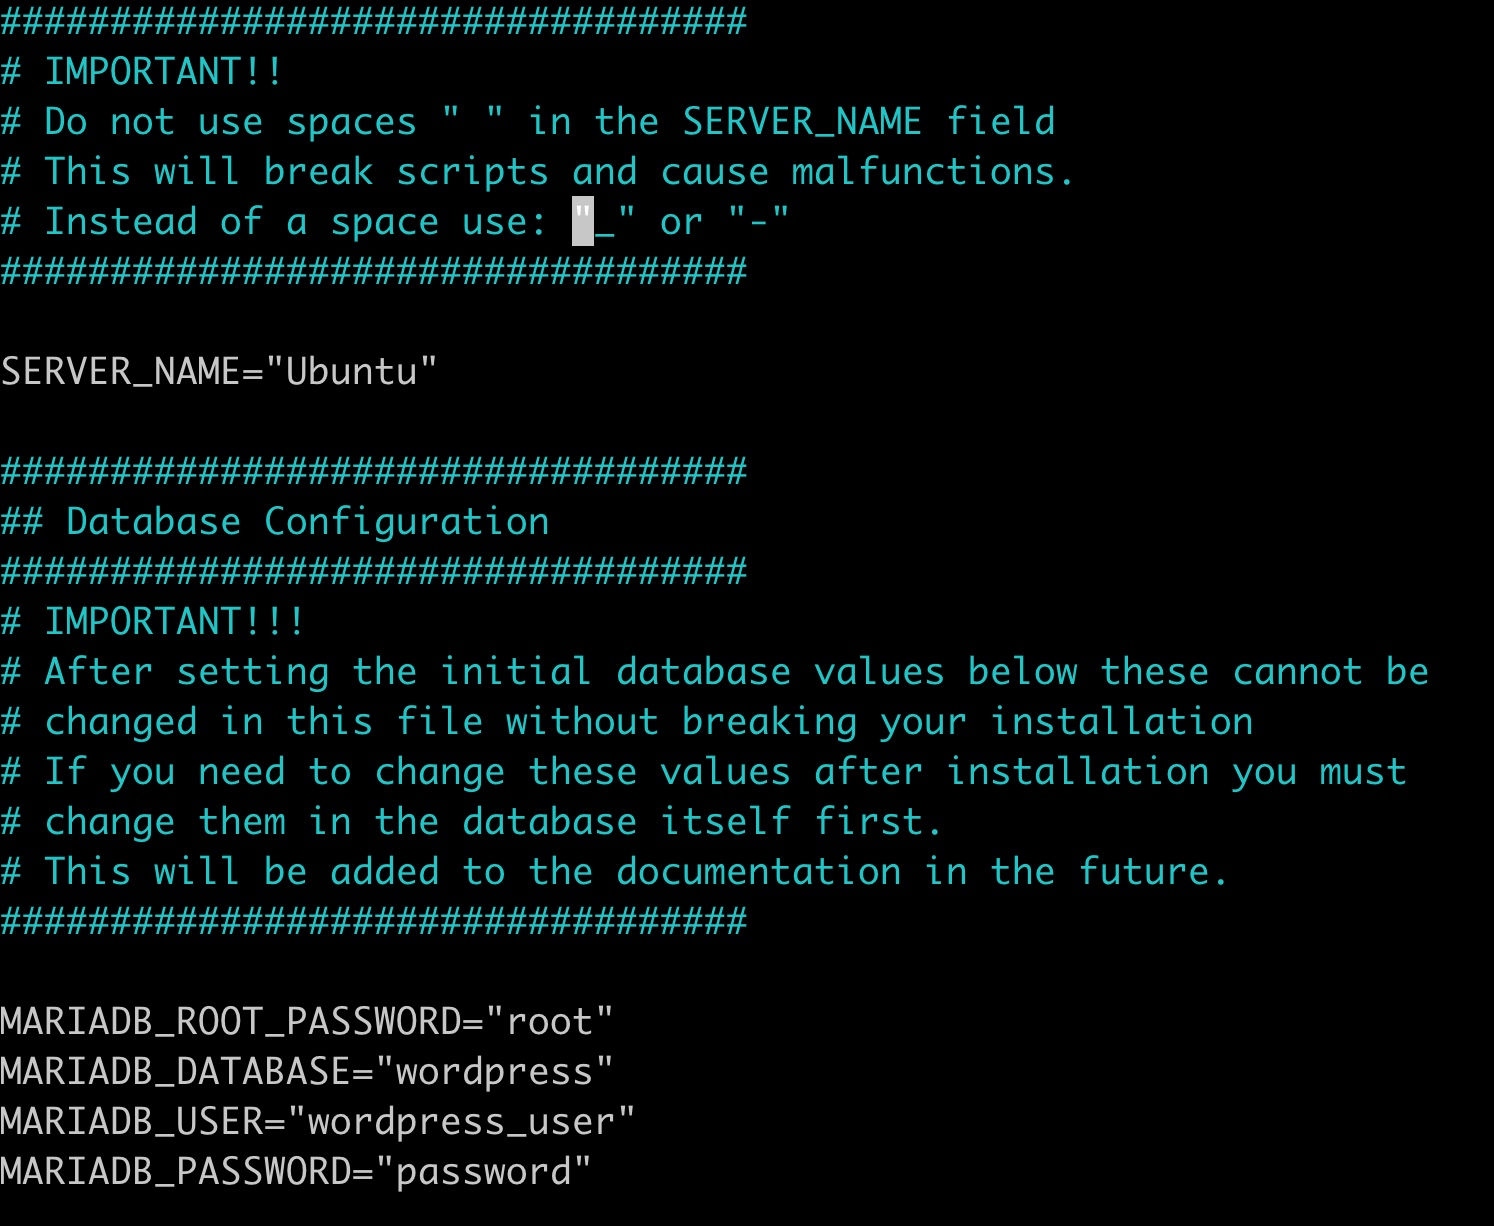 A screenshot of the terminal showing the output of 'nano .env' showing the contents of the .env file